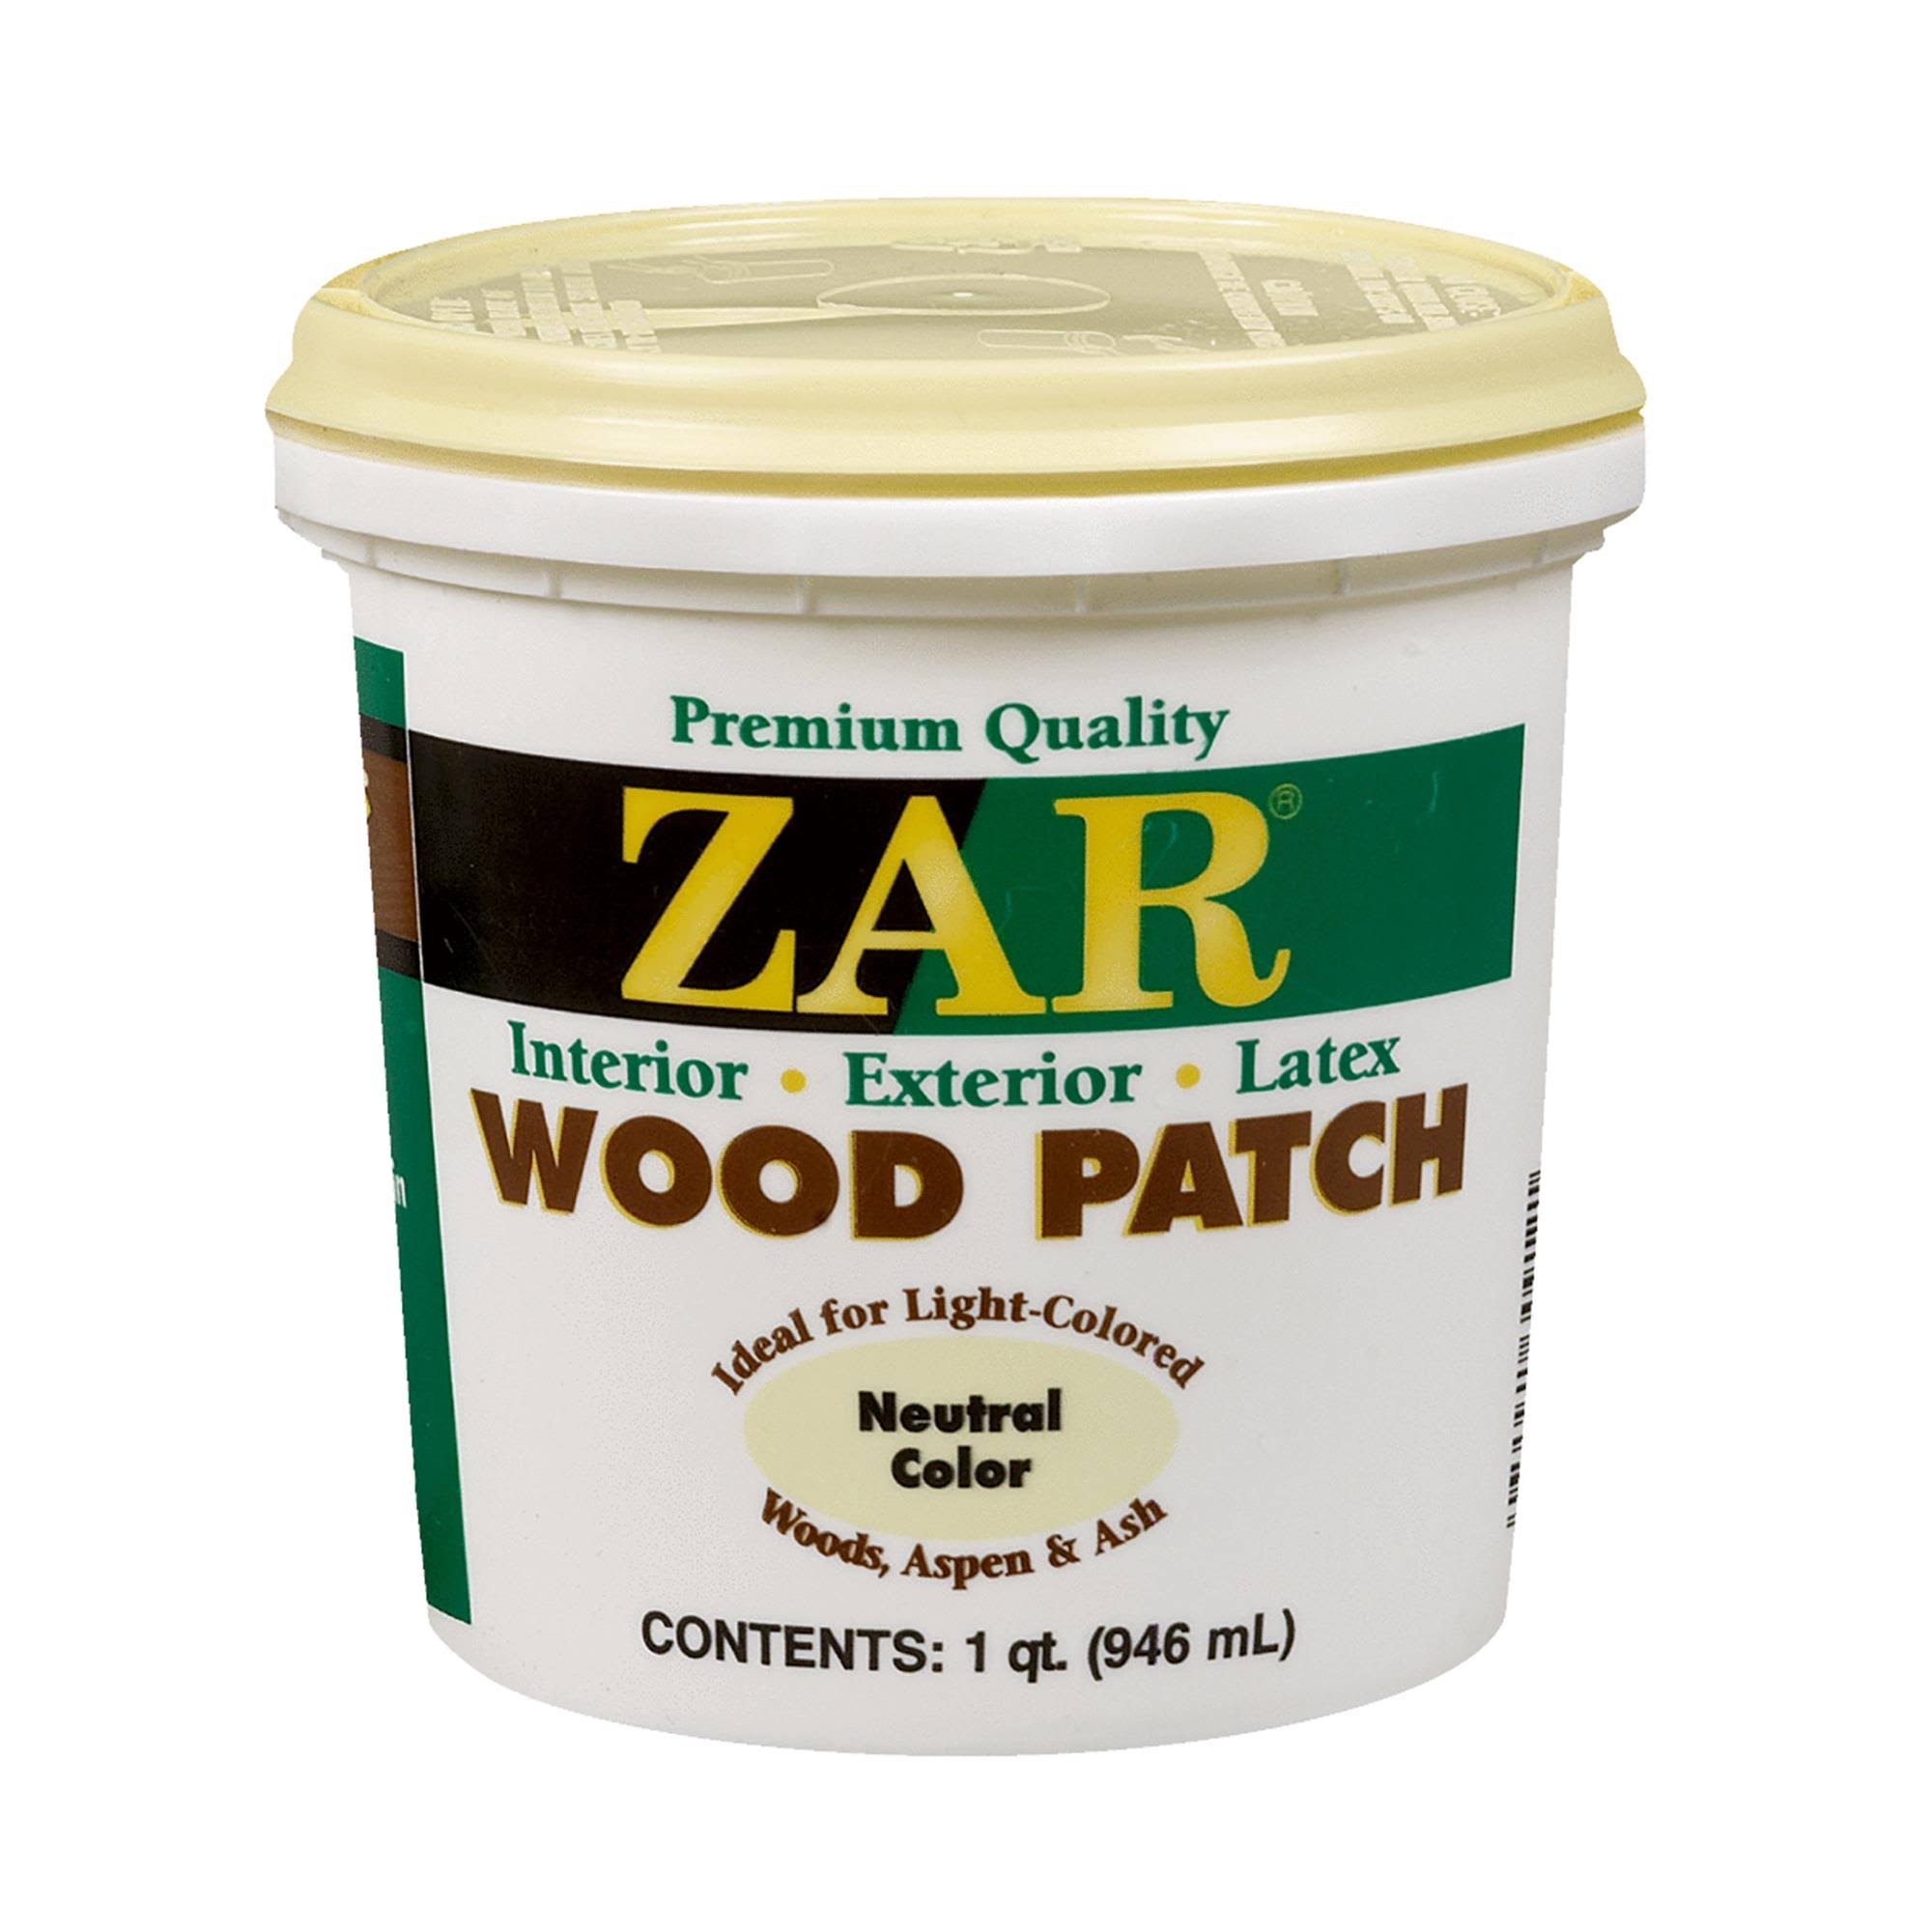 United Gilsonite Lab Zar Wood Patch - Neutral Color, 946ml